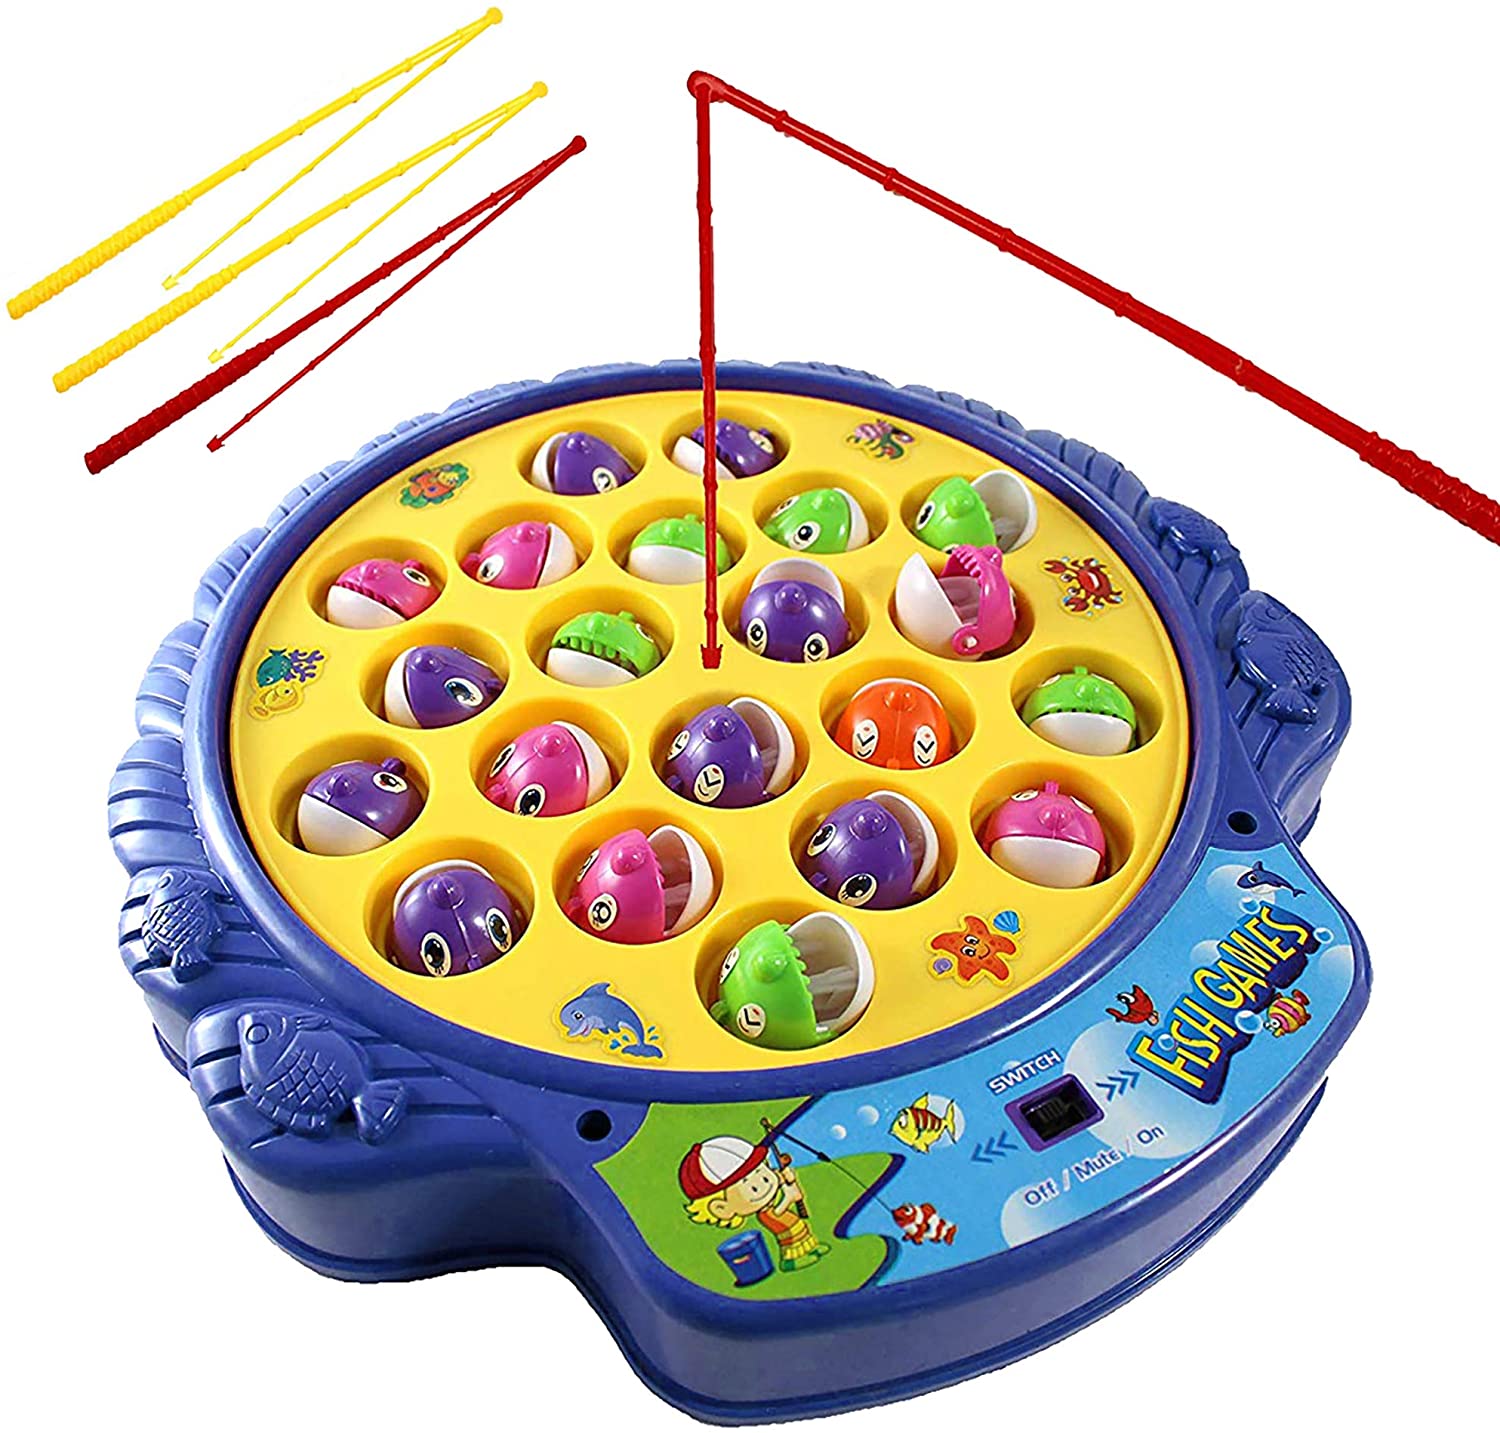 Haktoys Fishing Game Toy Set with Rotating Board